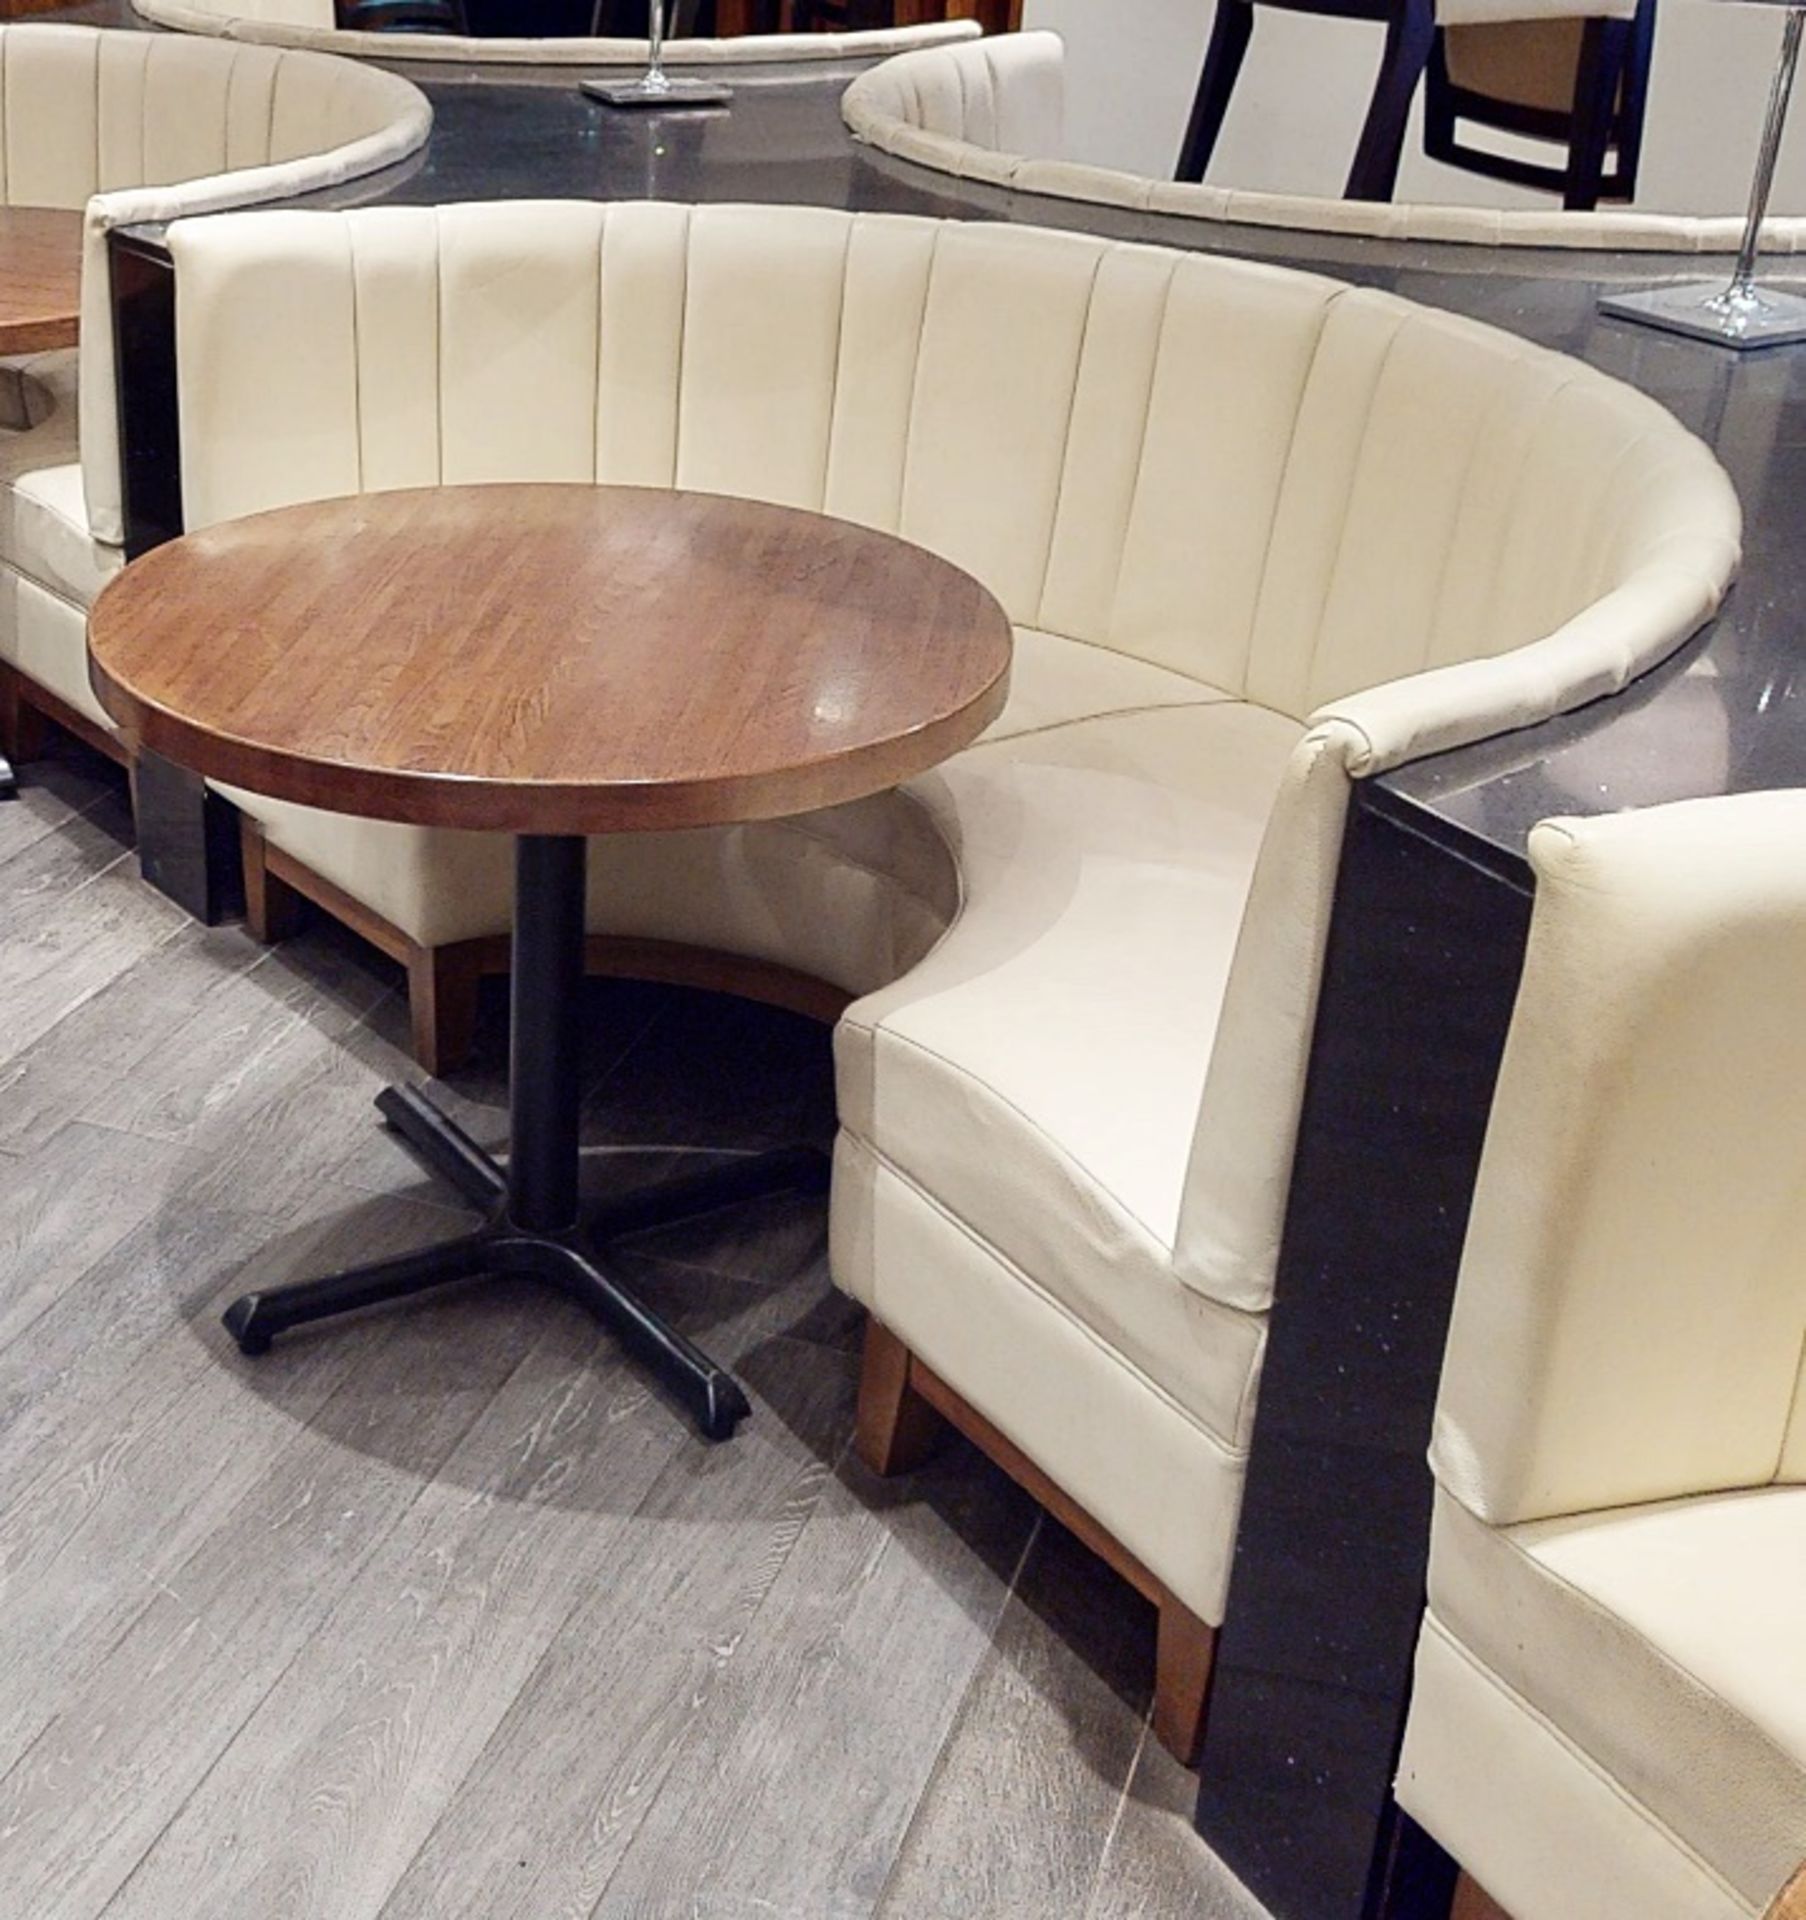 4 x Restaurant C-Shaped Seating Booths, Upholstered In A Cream Faux Leather, With A Pleated High